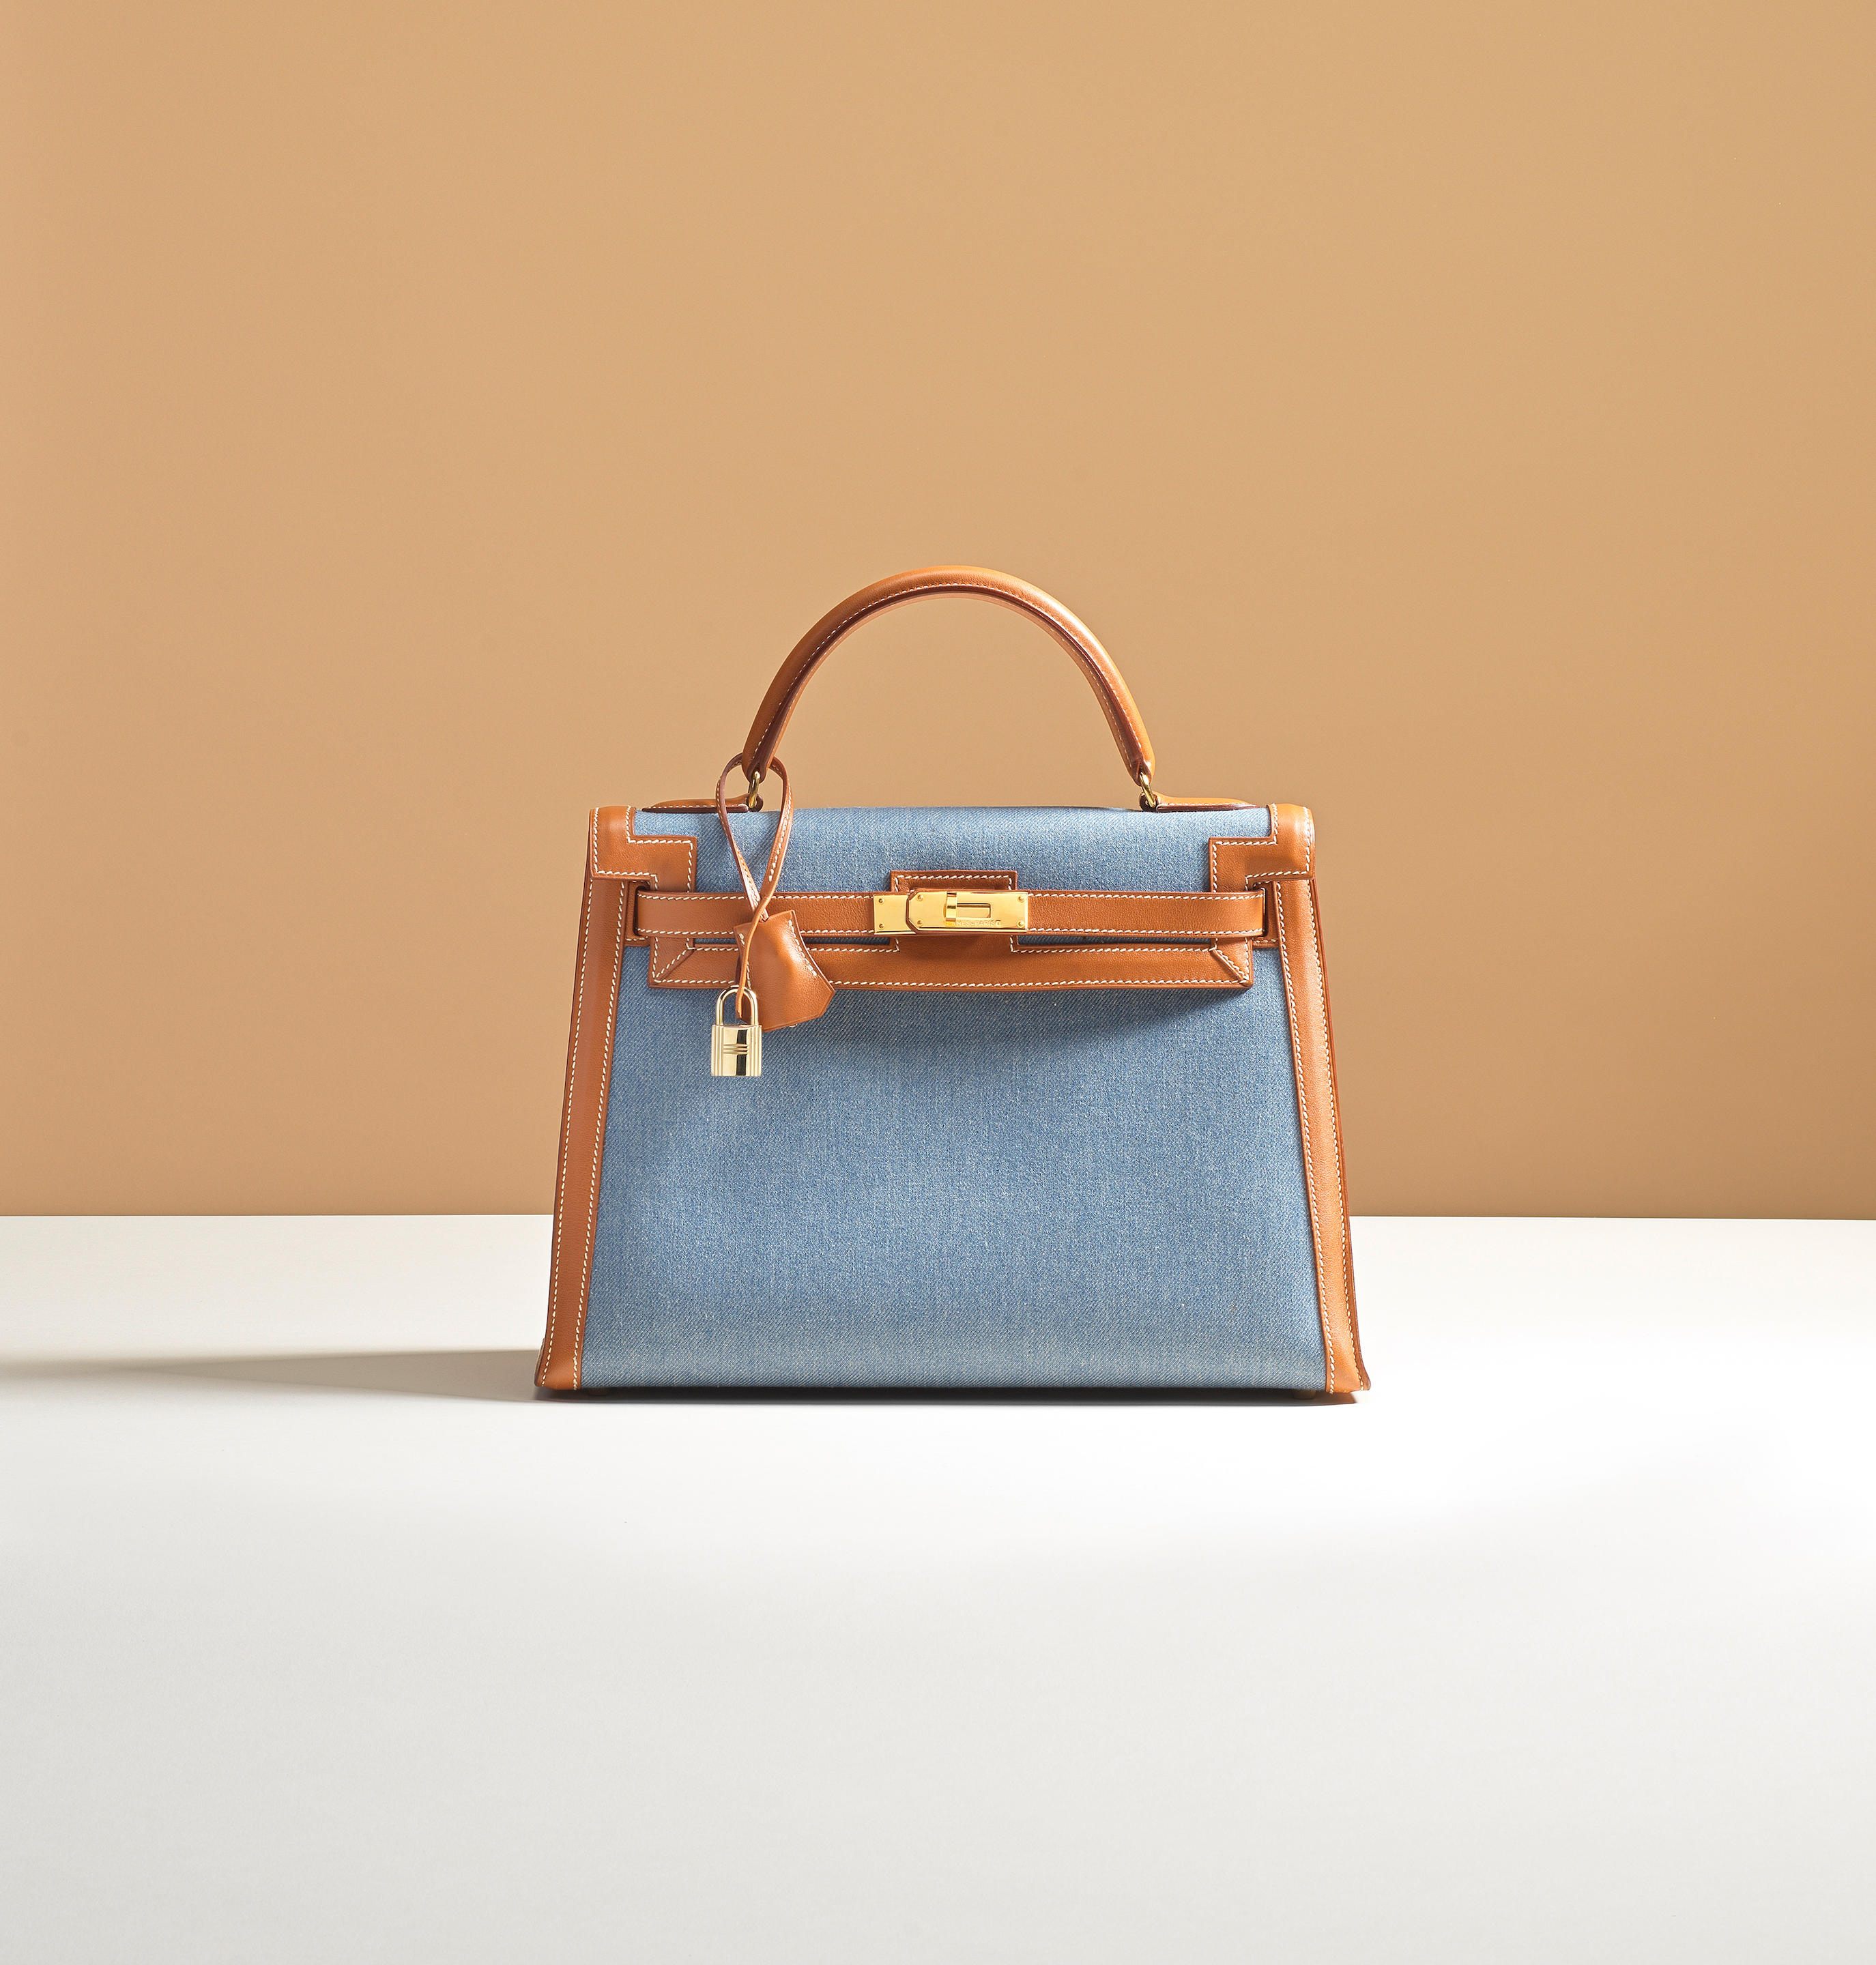 Bonhams, London, UK. 16 July 2021. Designer Fashion and Handbags sale  (taking place 20 July) includes Jane Birkin's Black Togo Birkin 35, Hermès,  c. 1999. with a signed letter of authenticity from